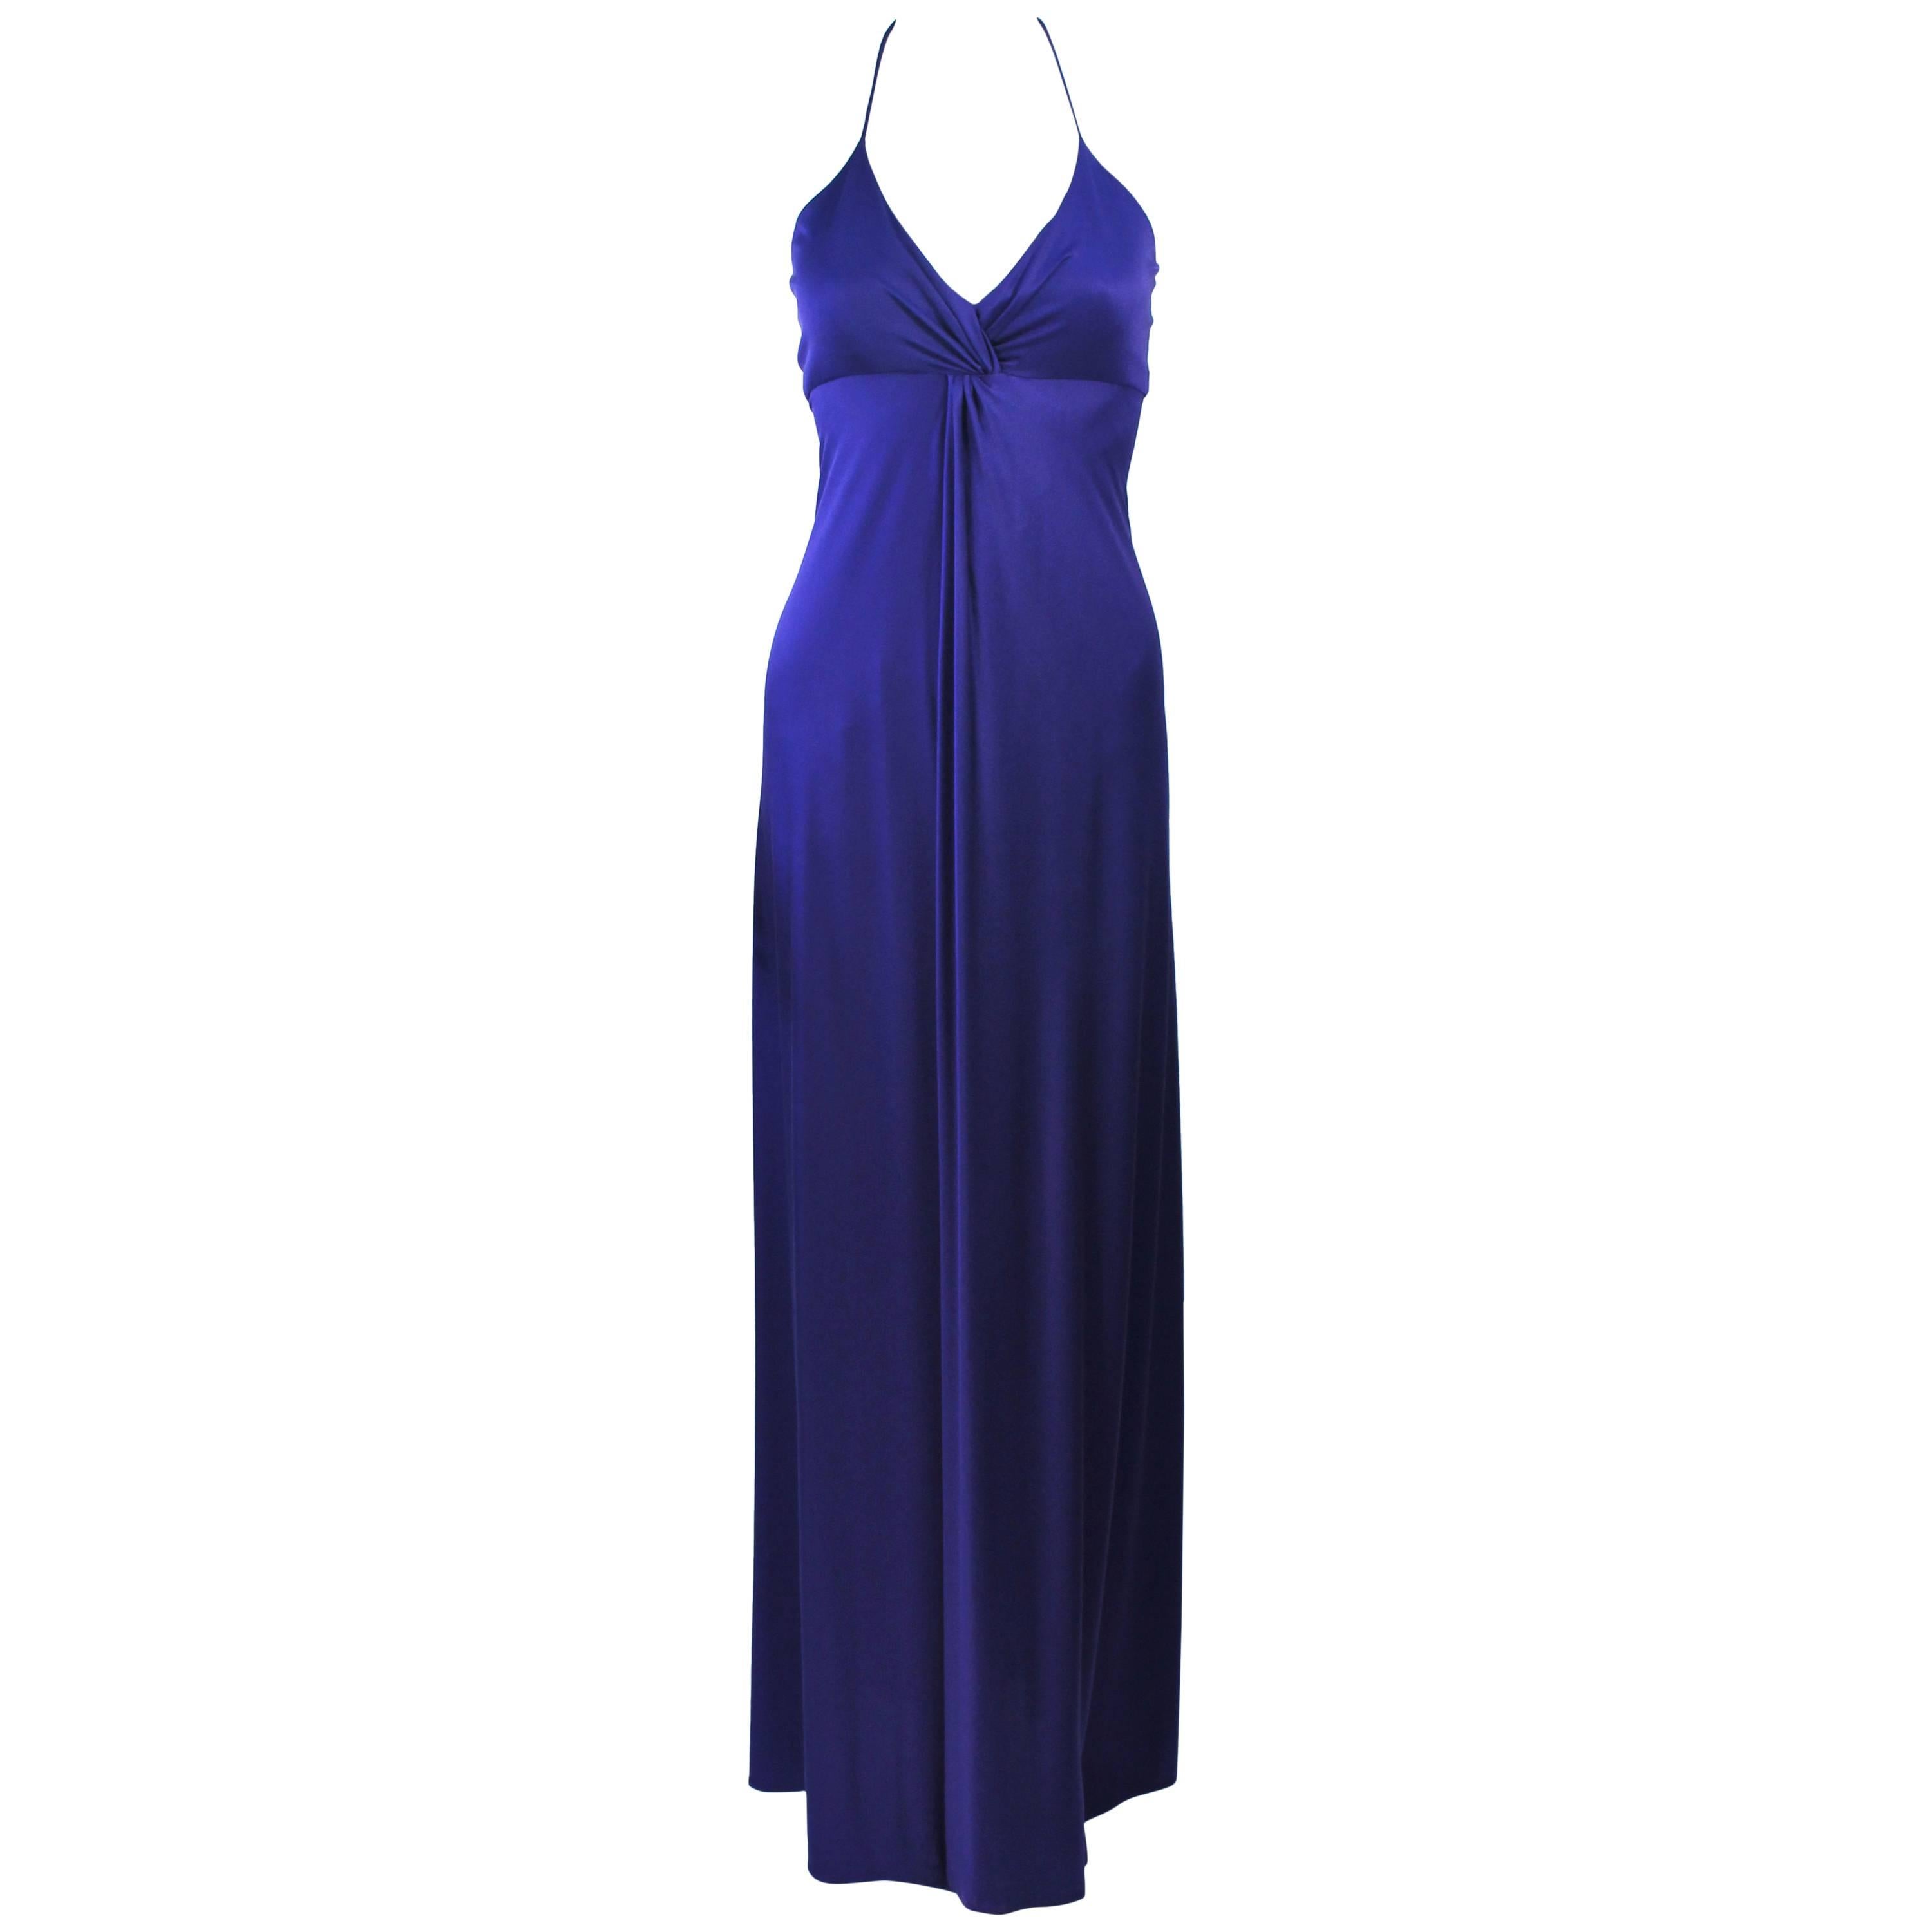 ELIZABETH MASON COUTURE Purple Silk Jersey Draped Halter Gown Made to Order For Sale